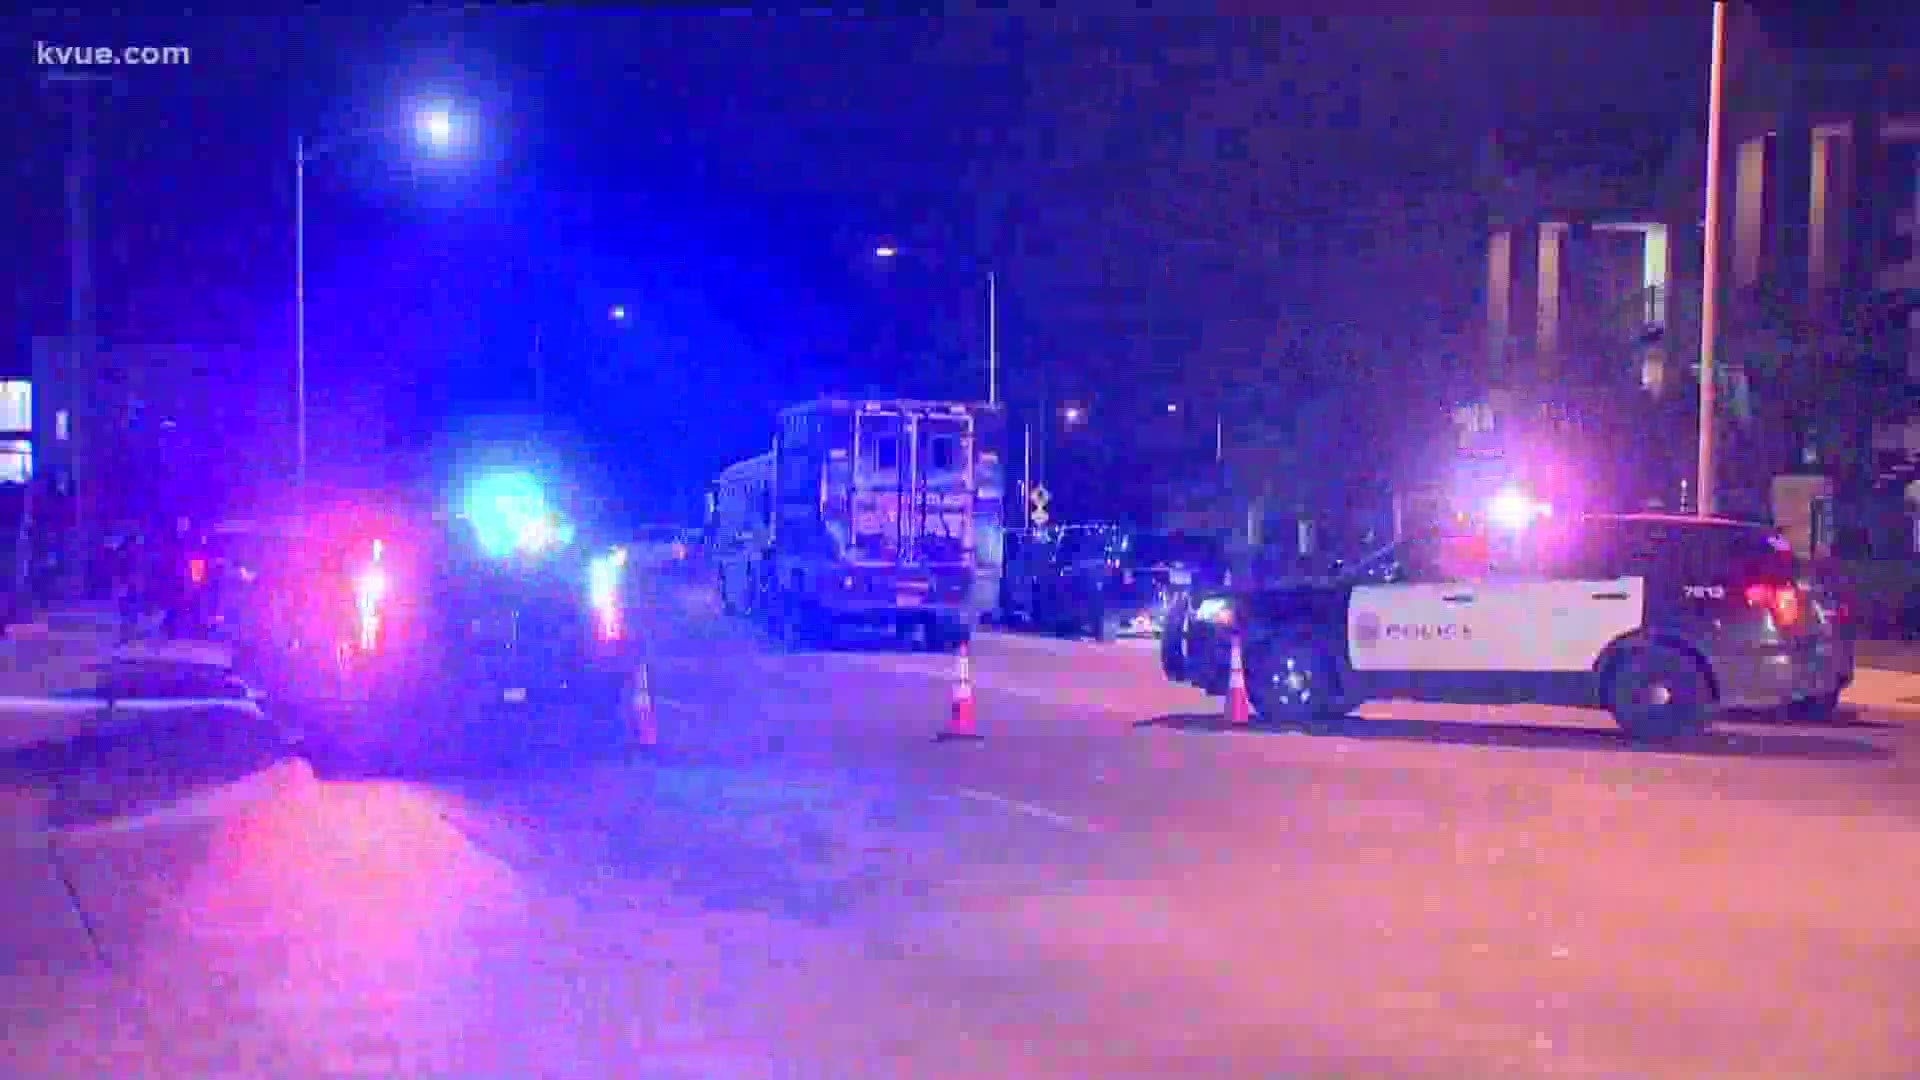 One man was arrested overnight after an hours-long SWAT callout near Pflugerville.